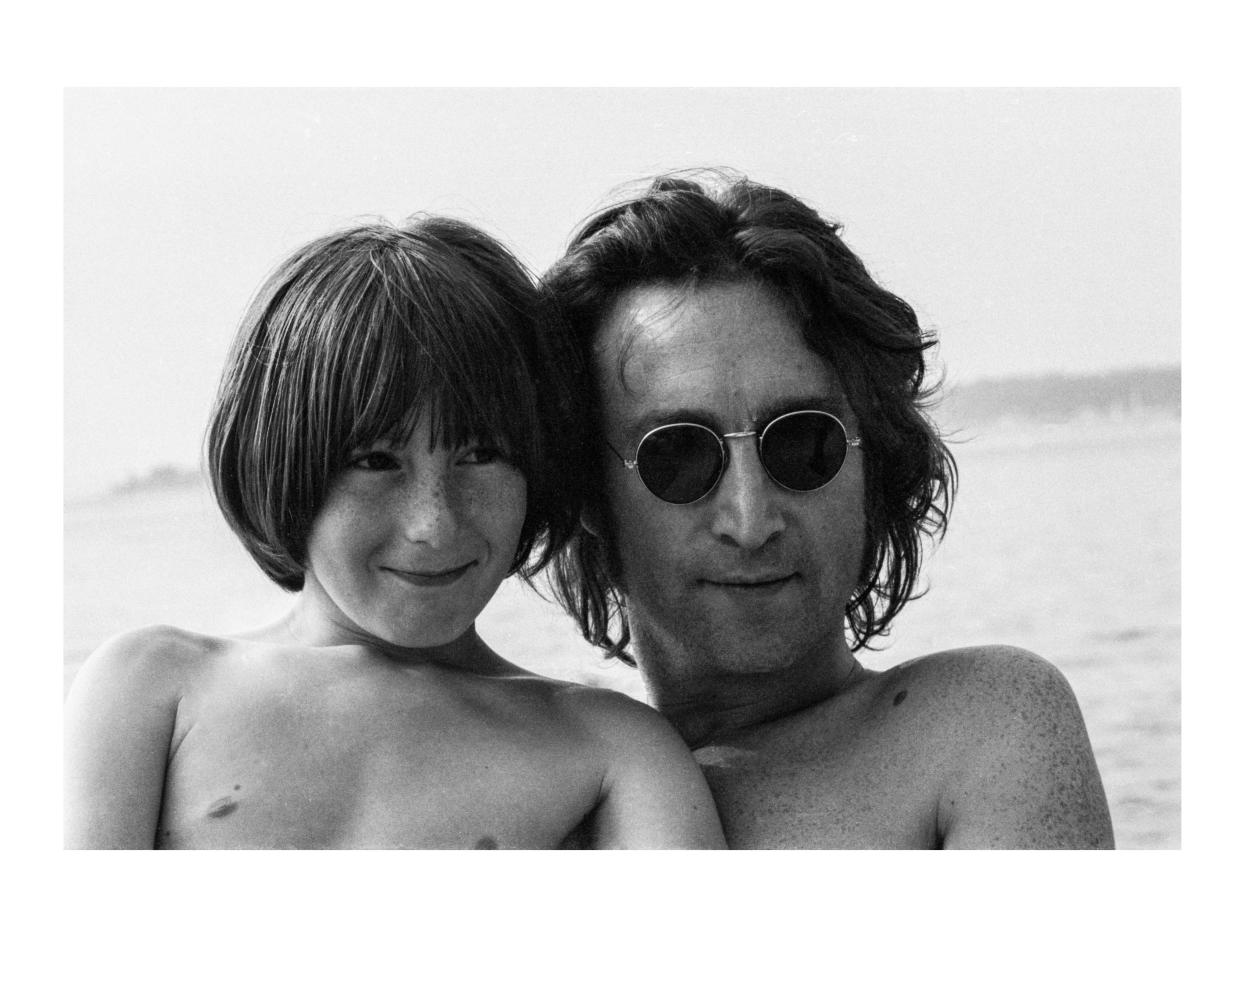 John Lennon reconnected with his son Julian, who is interviewed in the documentary, during his 18-month "lost weekend."